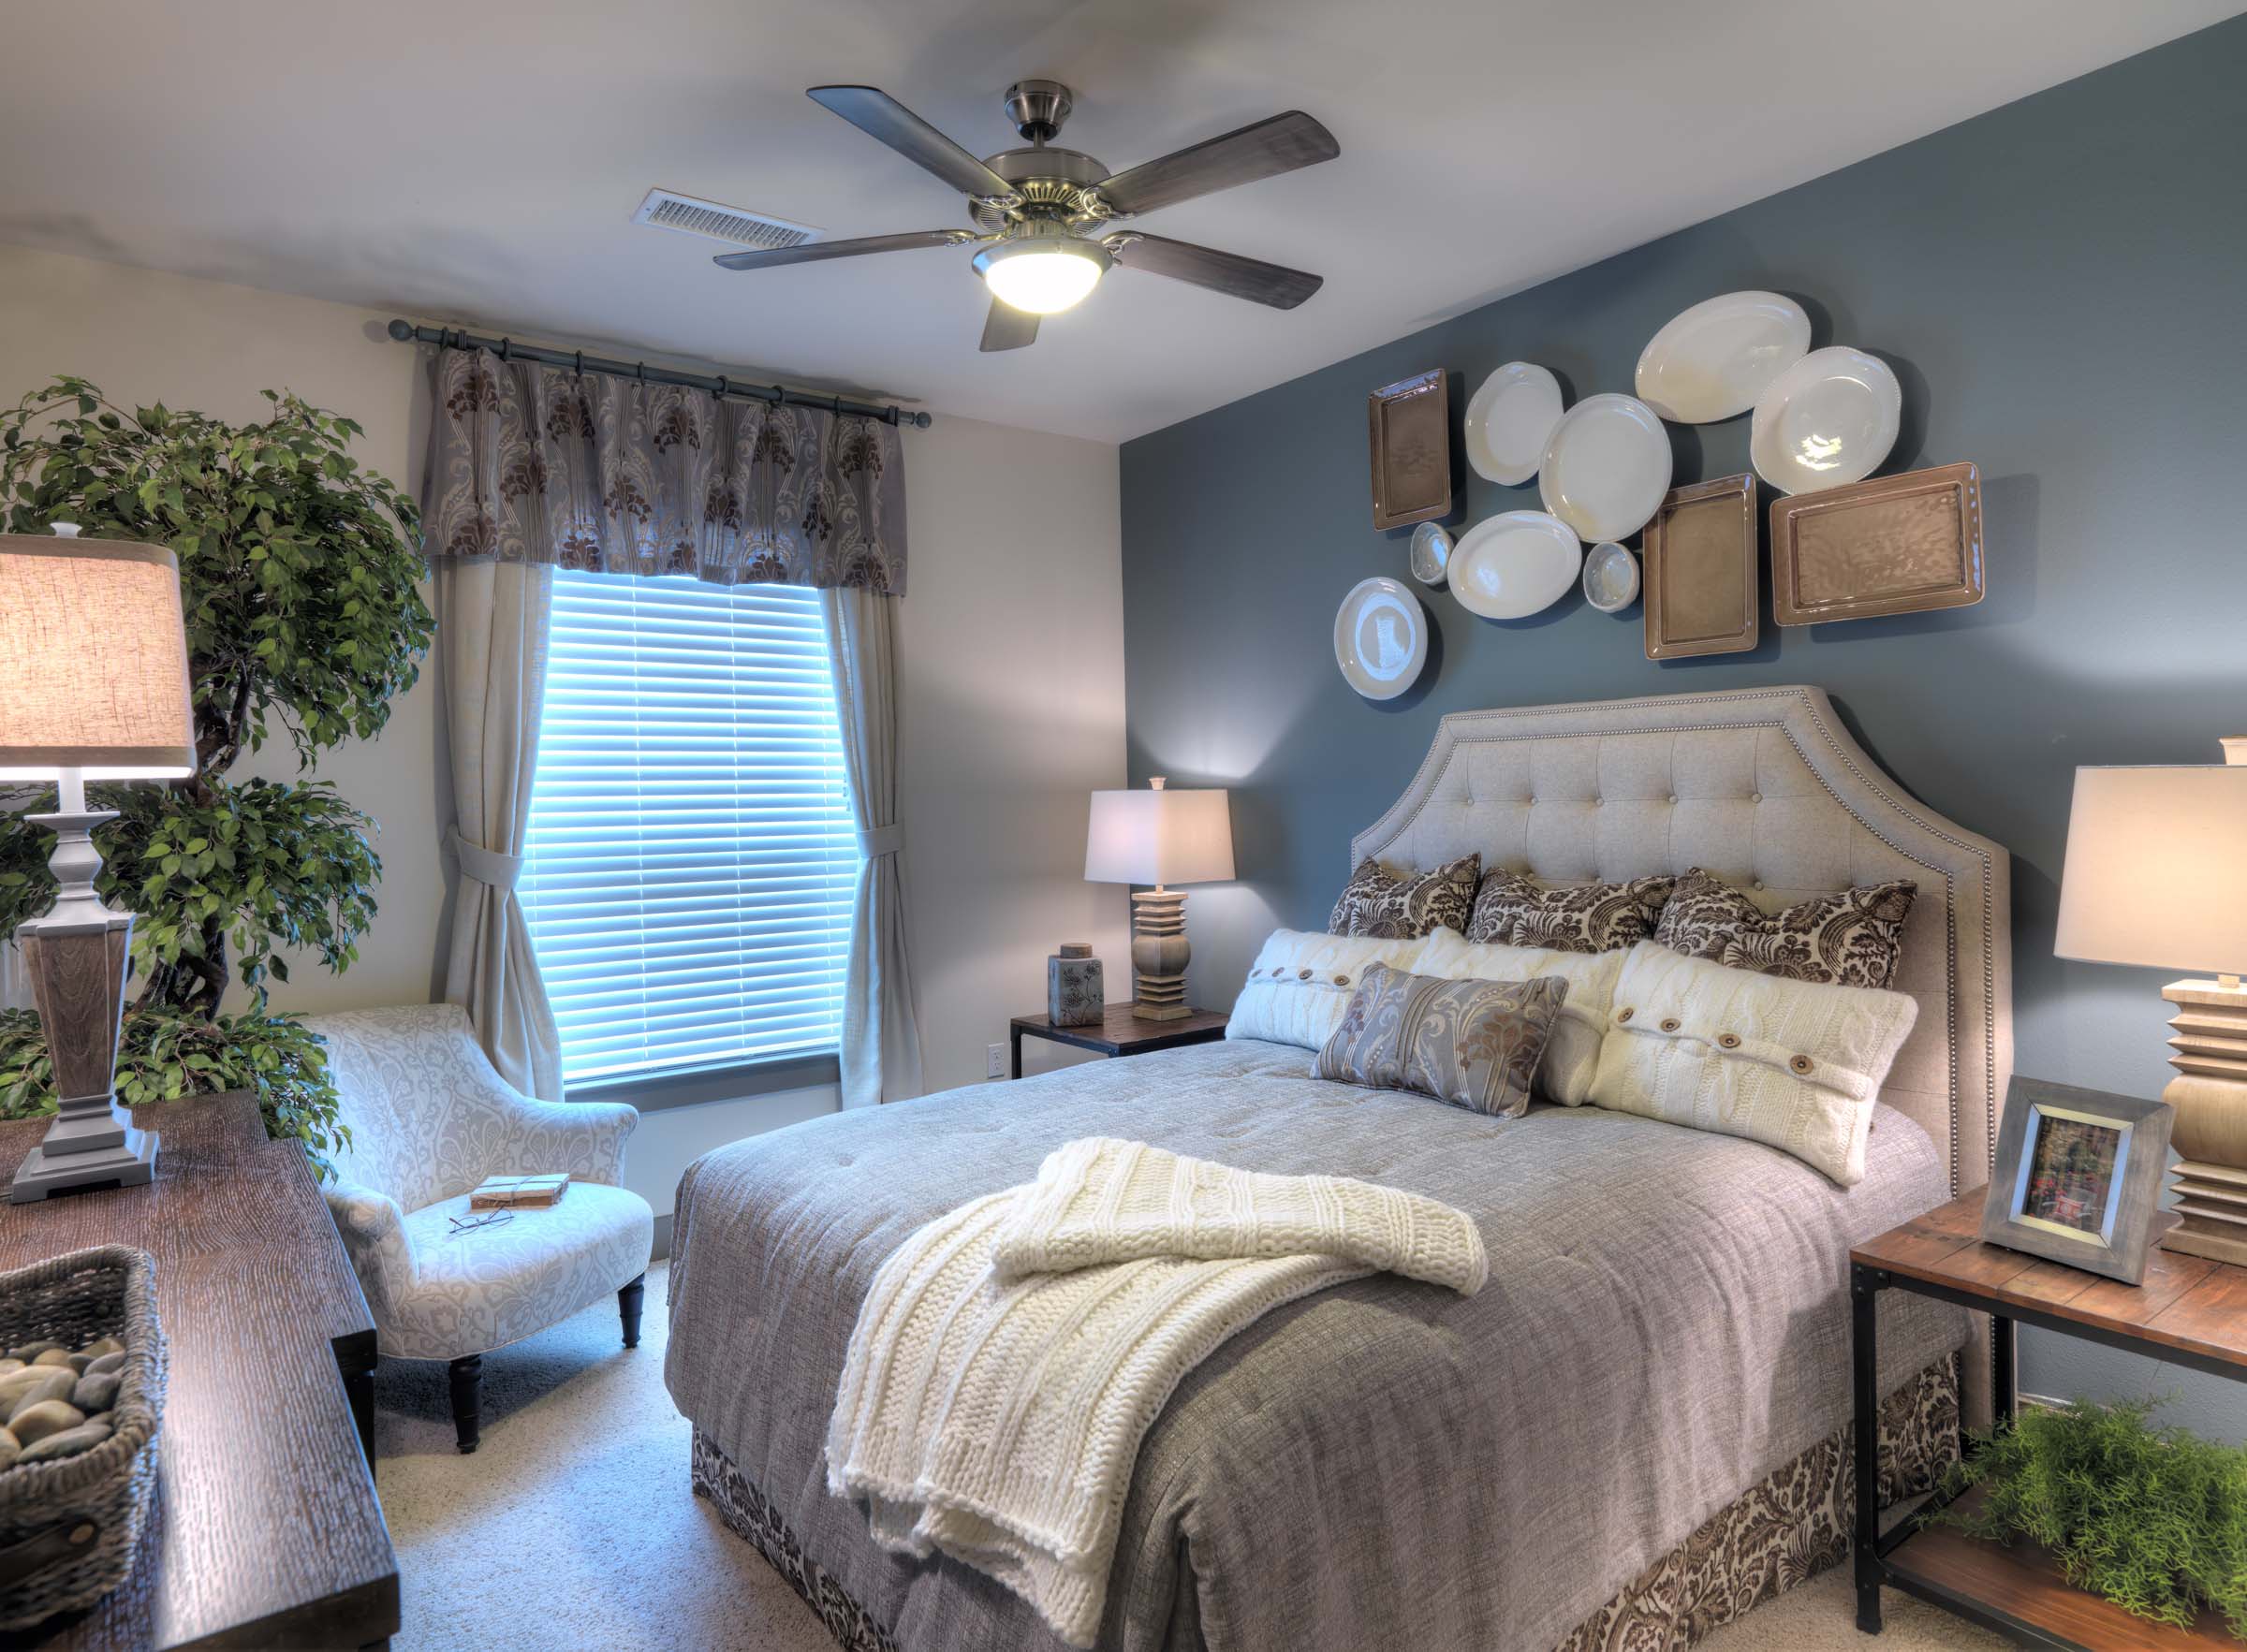 Bedroom with accent wall and ceiling fan